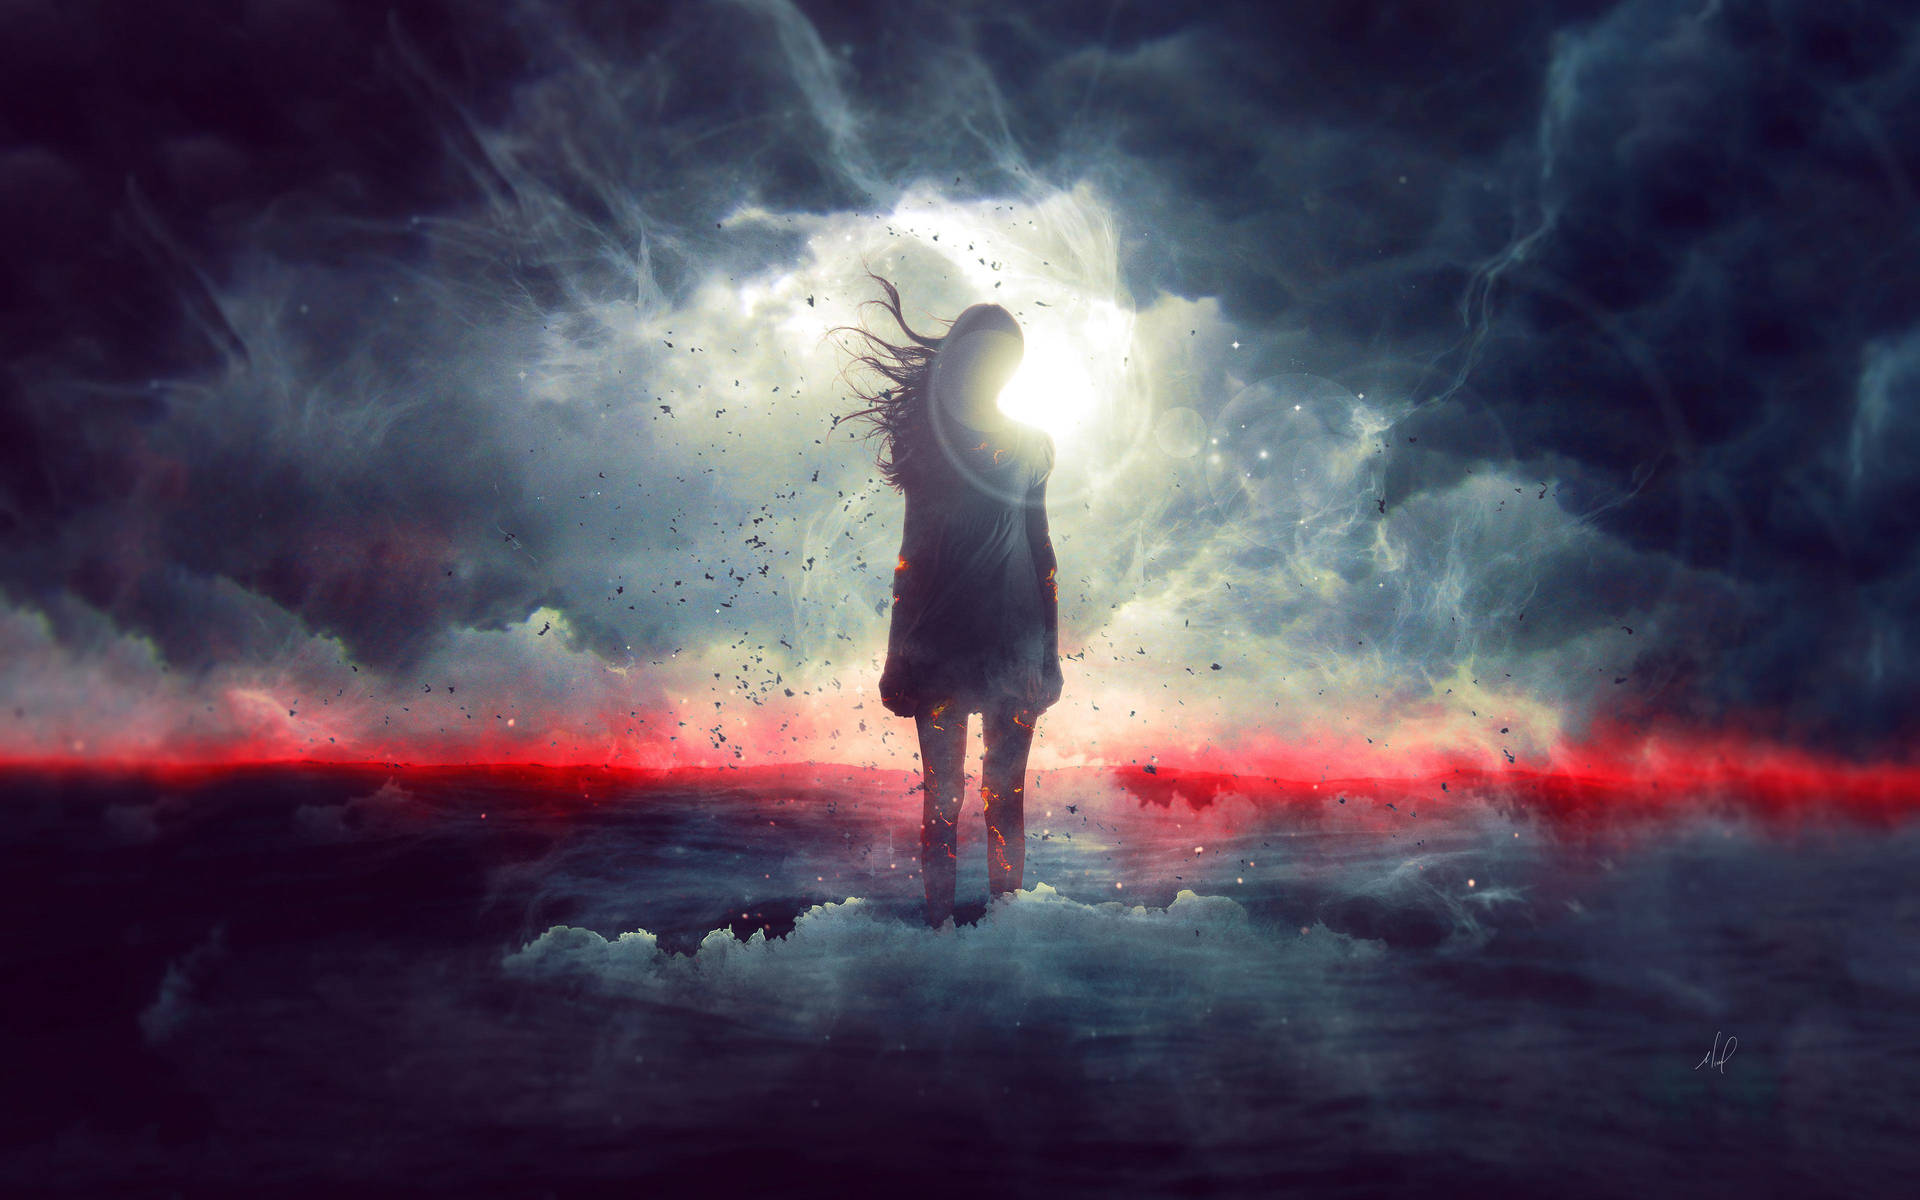 A Surreal Lucid Dream of a Young Girl Wallpaper